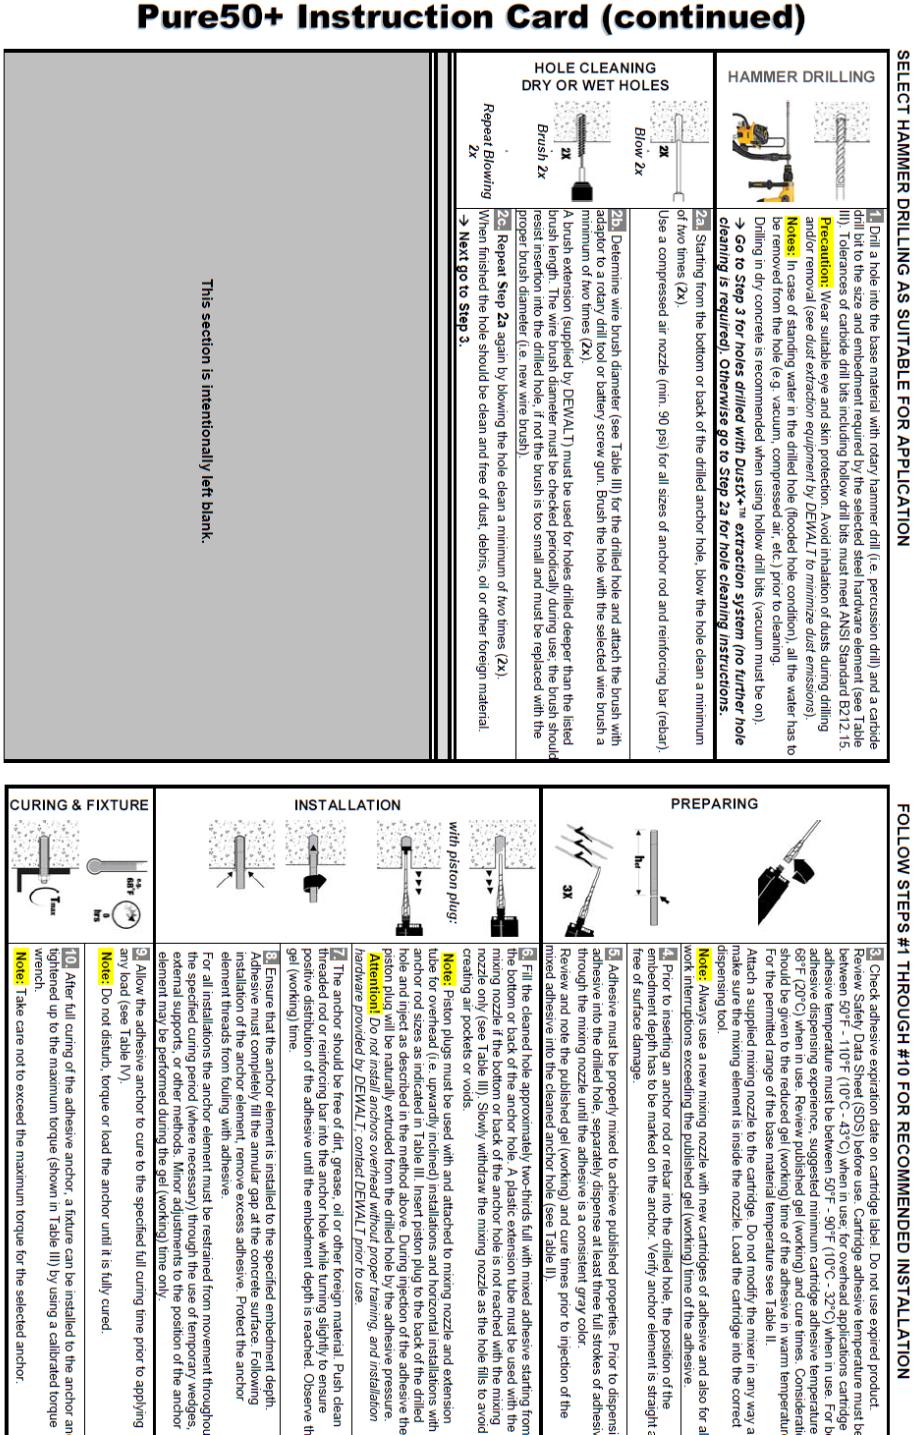 ESR-3576 Most Widely Accepted and Trusted Page 16 of 17 FIGURE 3